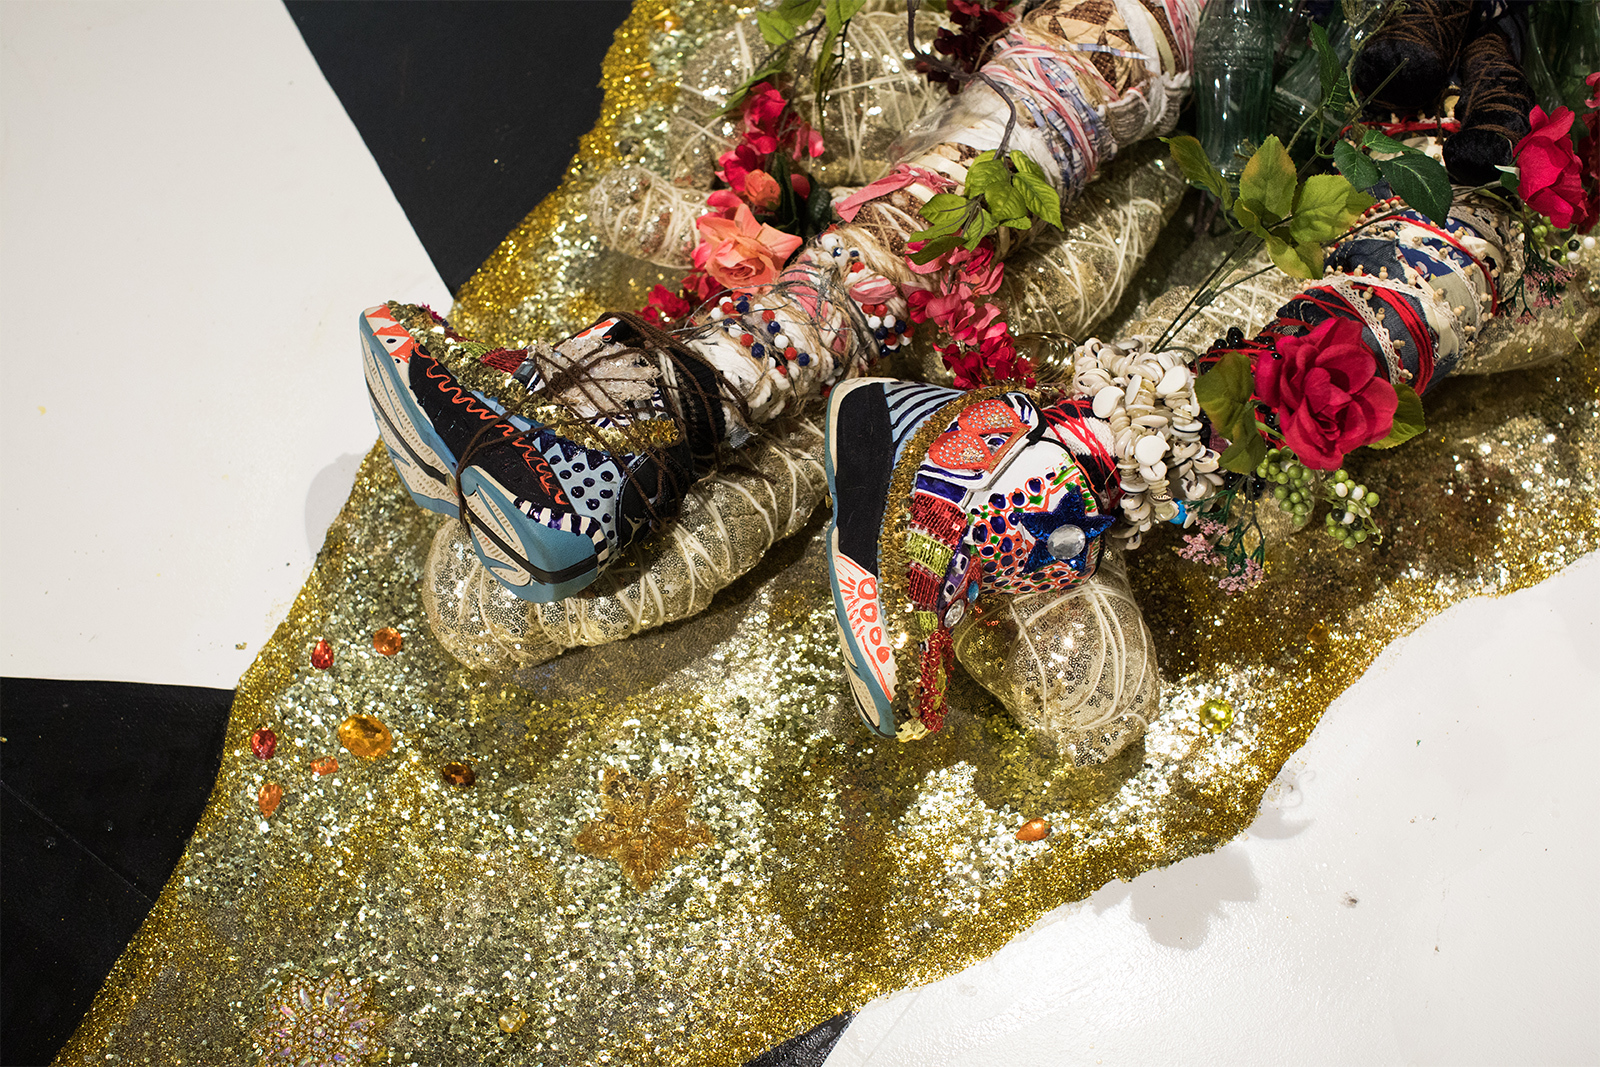 Vanessa German - detail of feet of figure laying on the ground. The feet wear high-top sneakers covered in sequins and paint. Figure is laying on a a triangle of gold glitter against a black and white floor